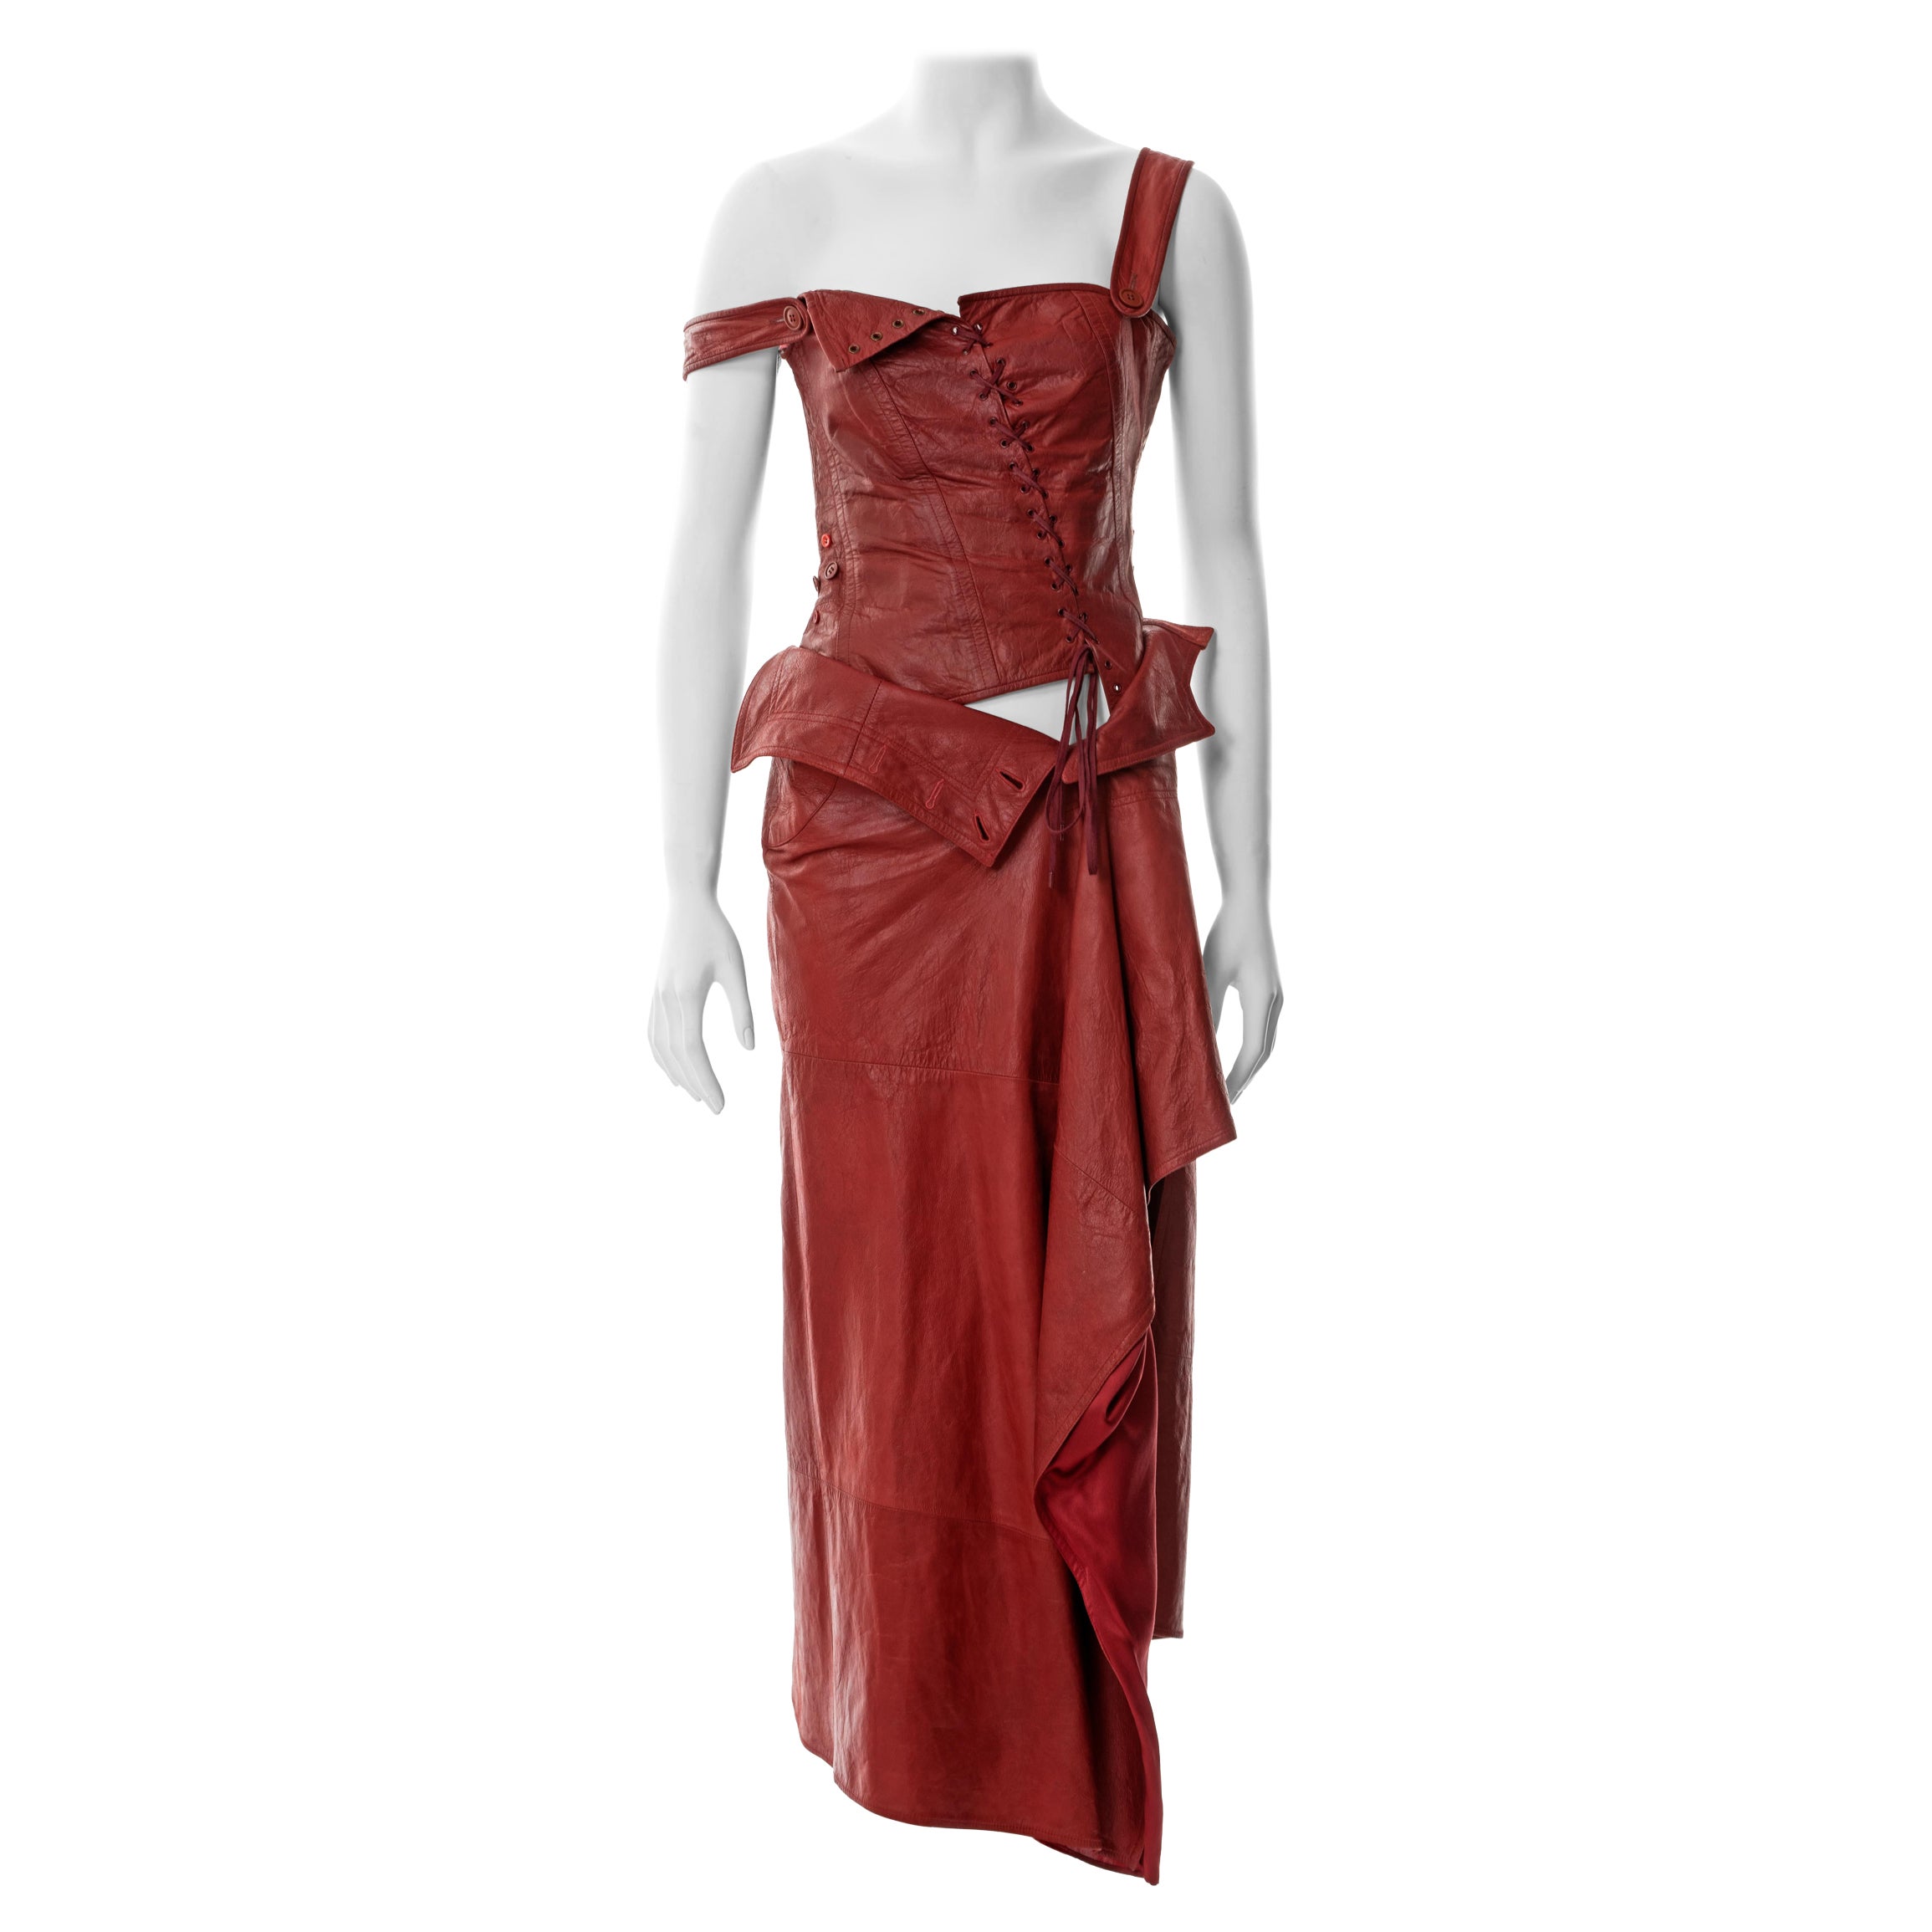 Christian Dior by John Galliano red lambskin leather corset and skirt, ss 2000